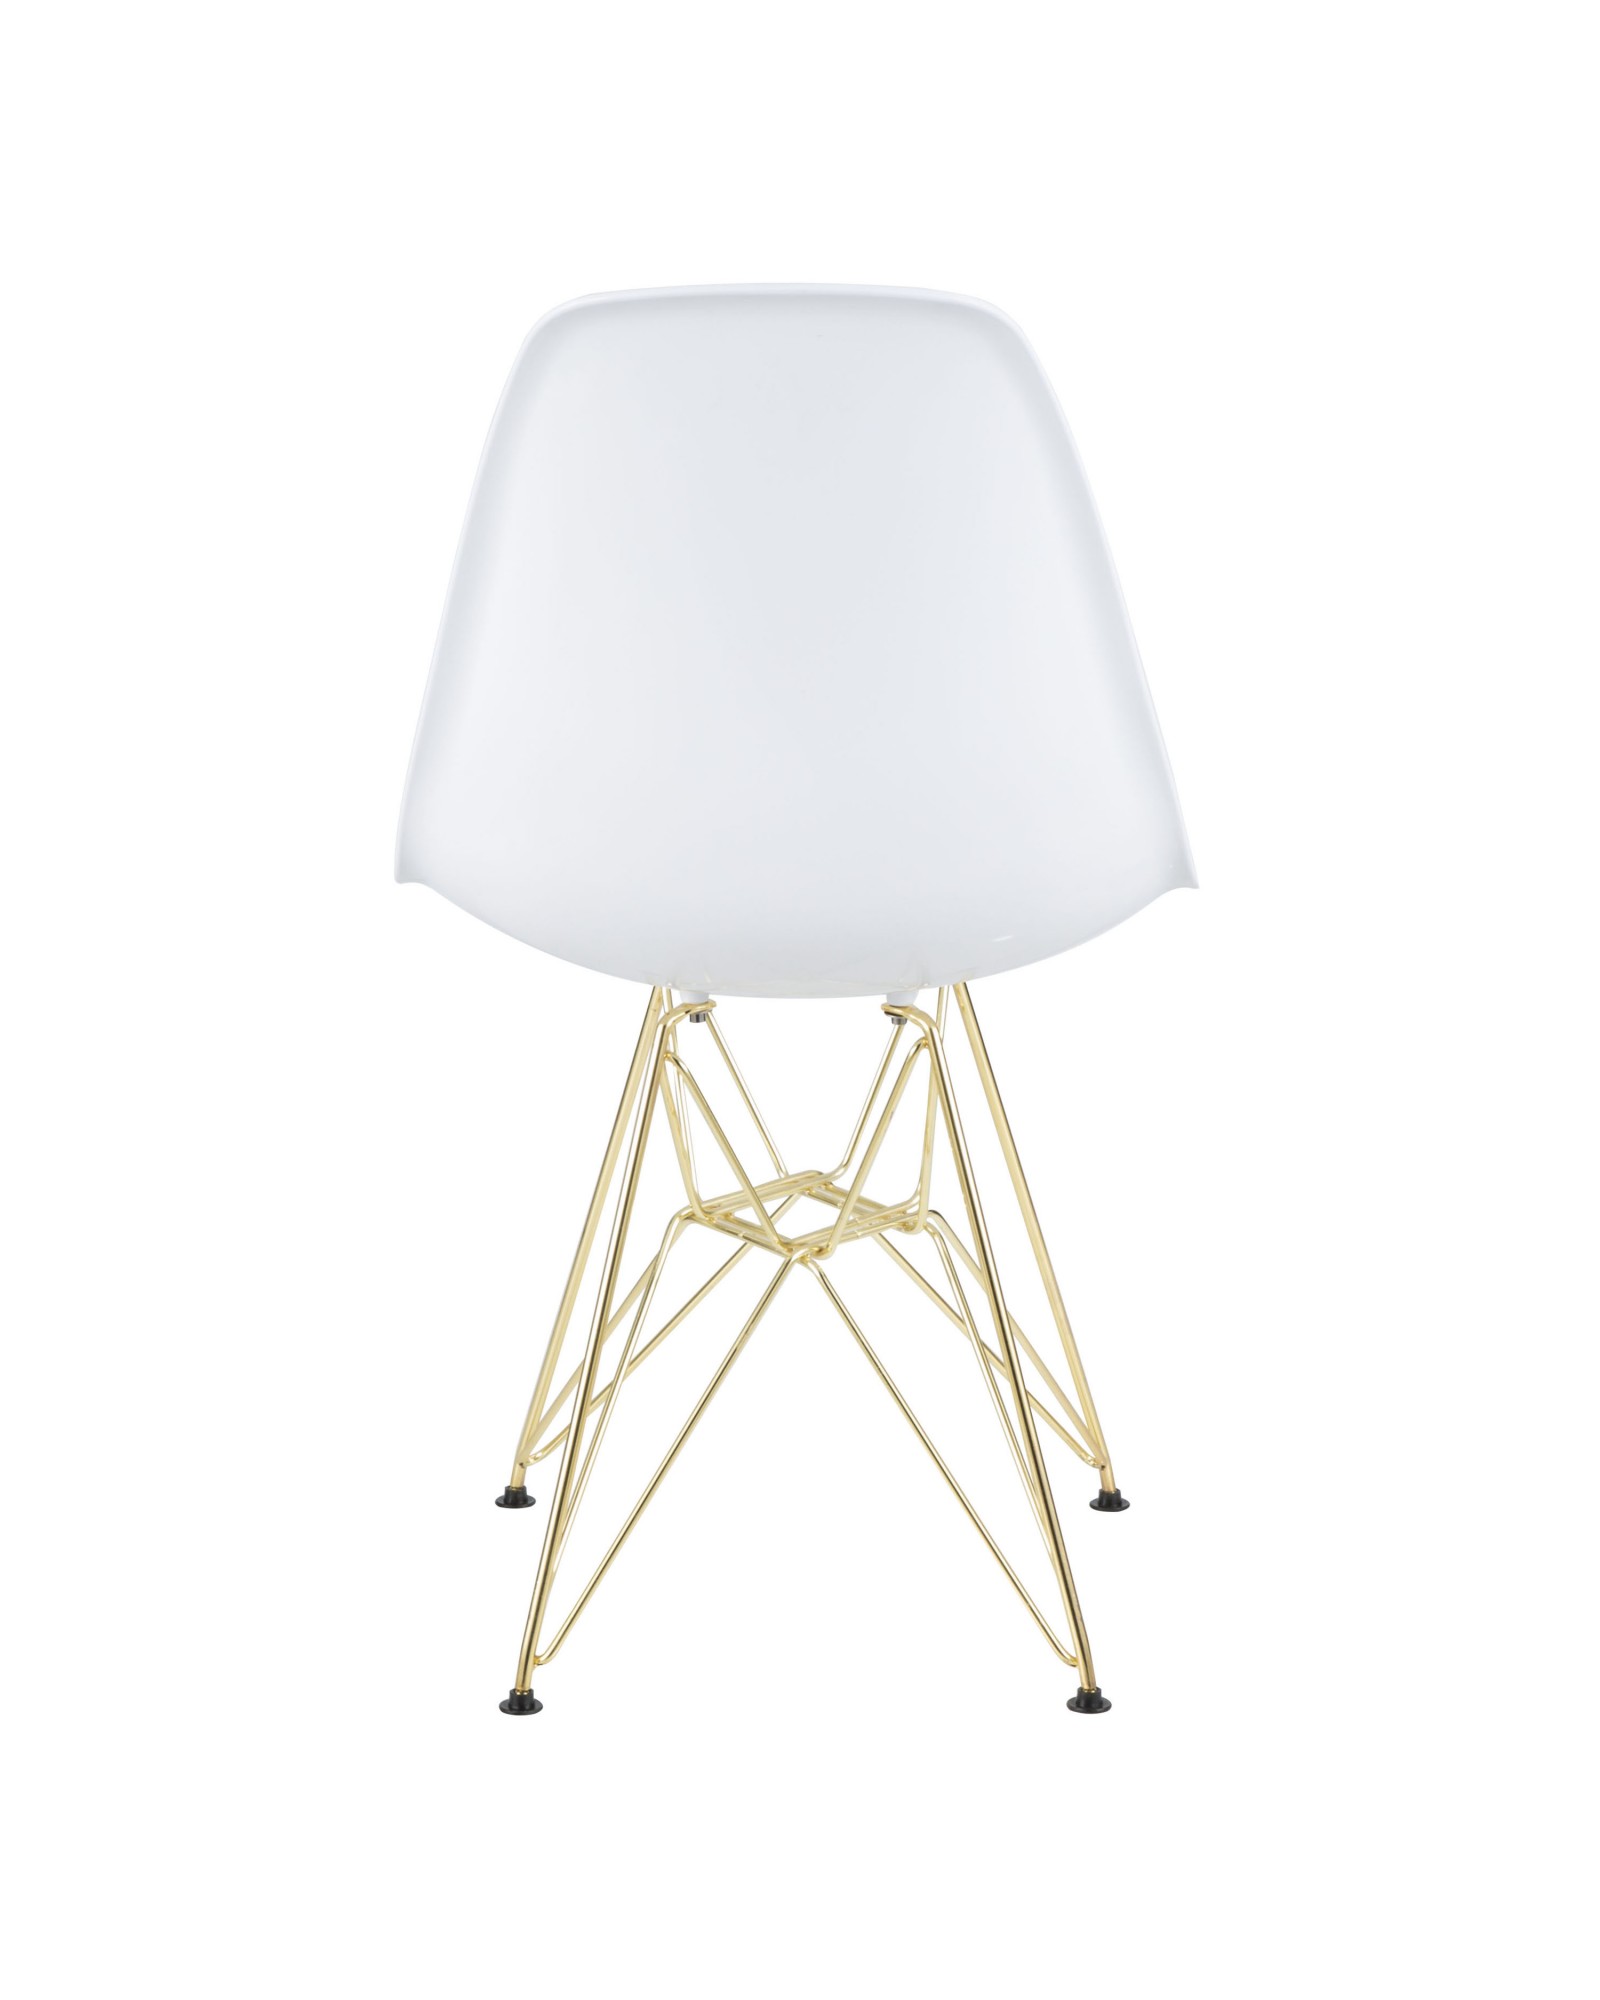 Brady Mid-Century Modern Dining/Accent Chair in Gold and White -Set of 2